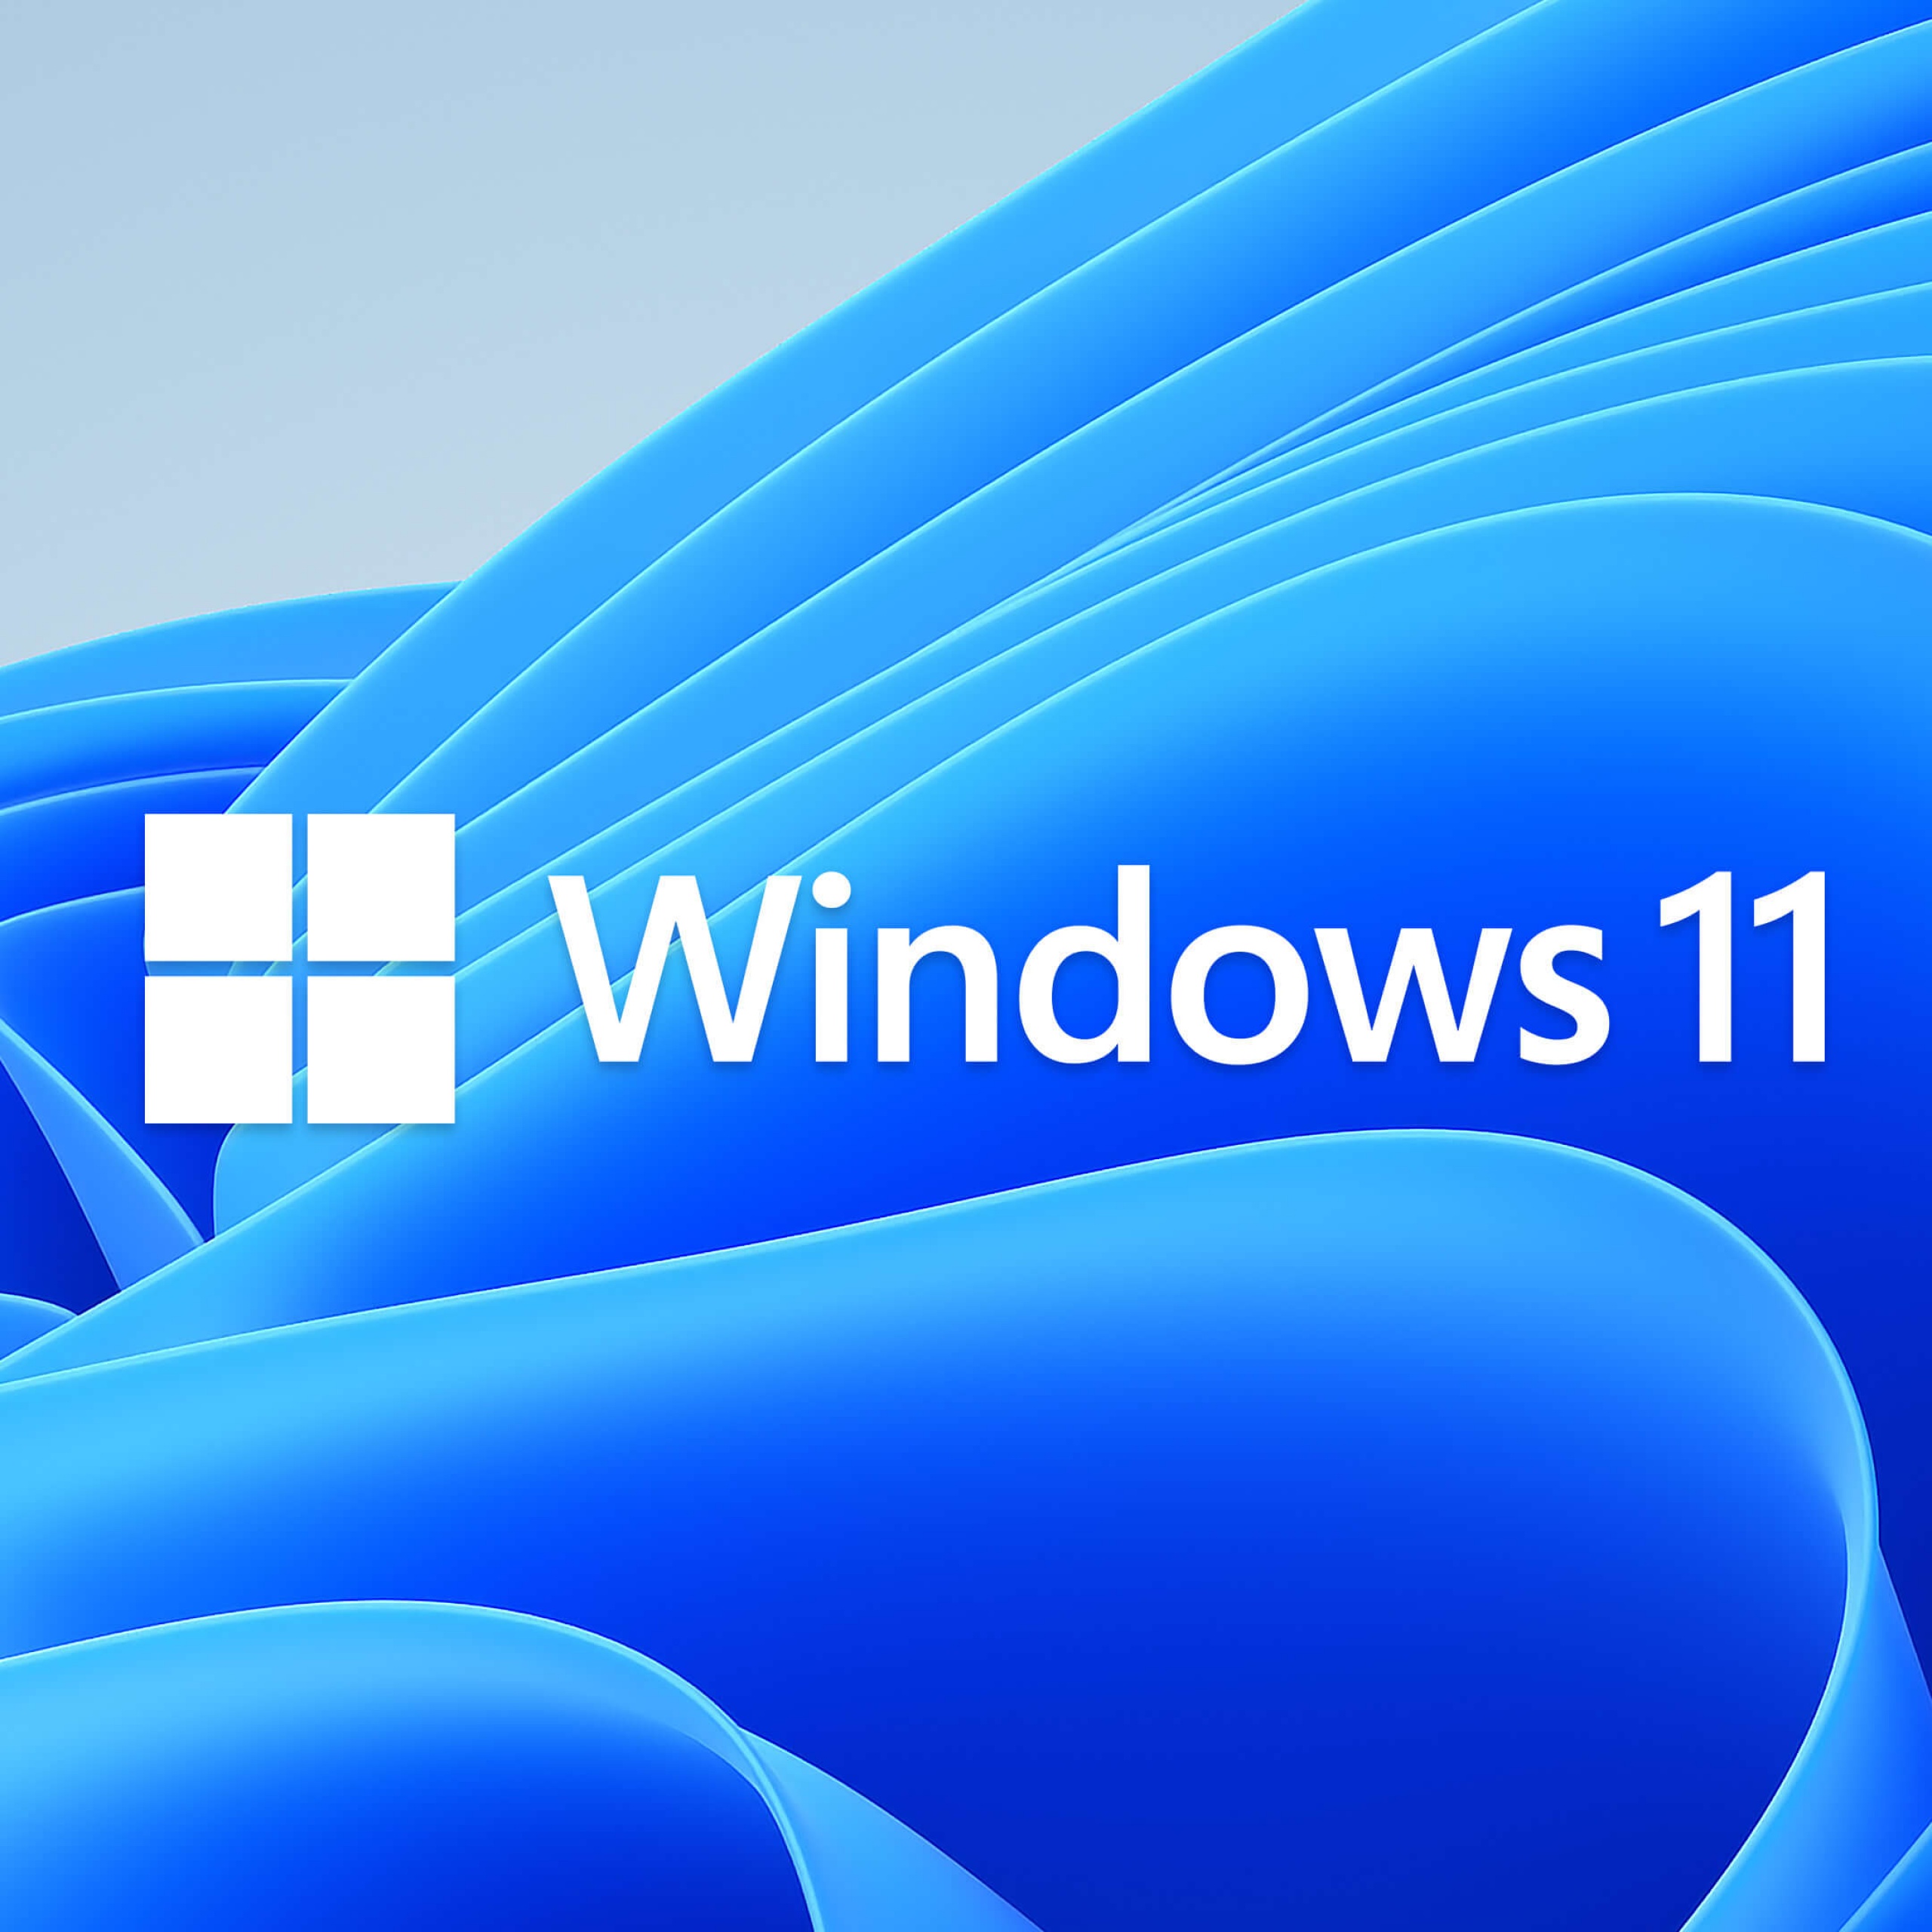 Windows 11 Wallpaper 4K, Stock, Official, Blue background, Abstract ...